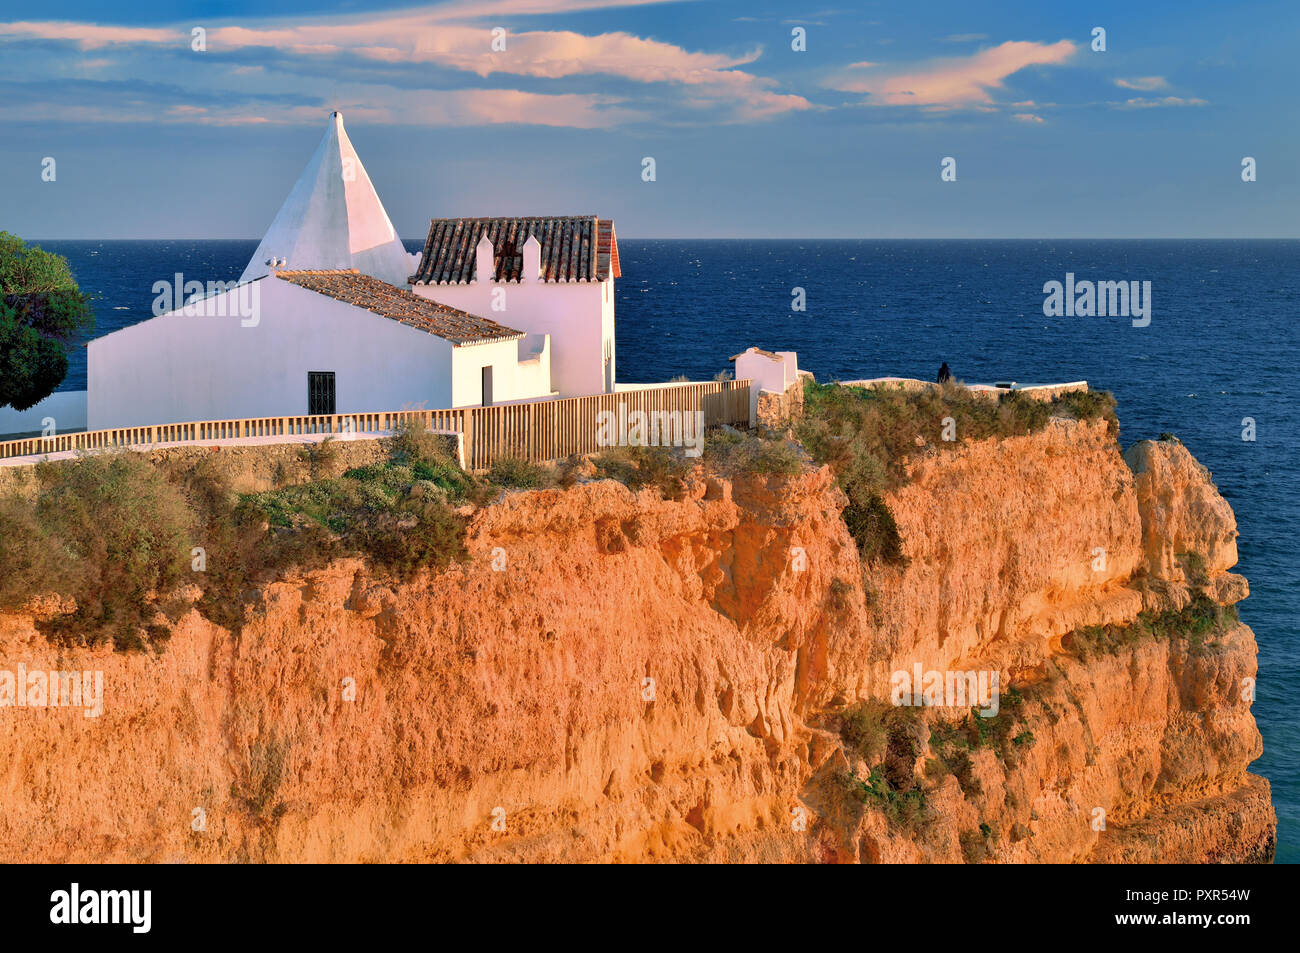 White washed chapel on a rock surrounded by blue ocean Stock Photo